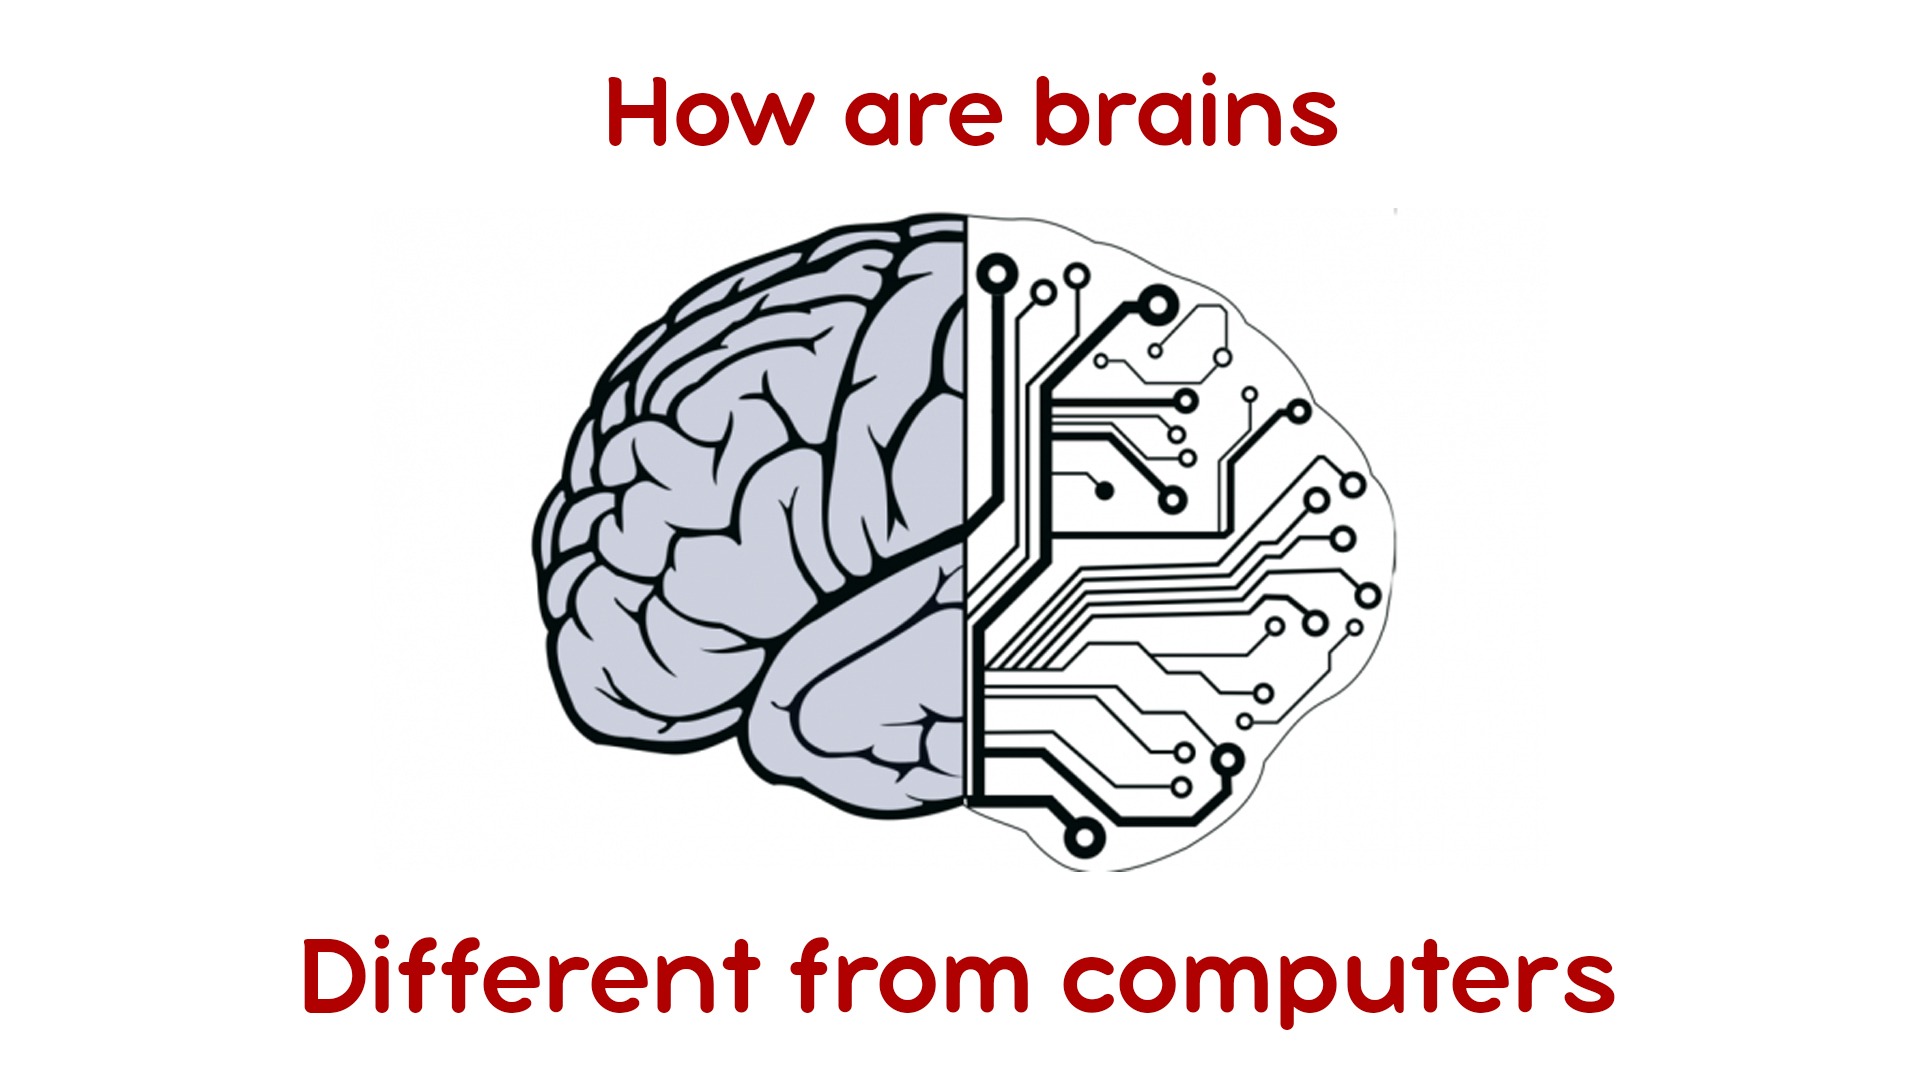 How are brains different from computers